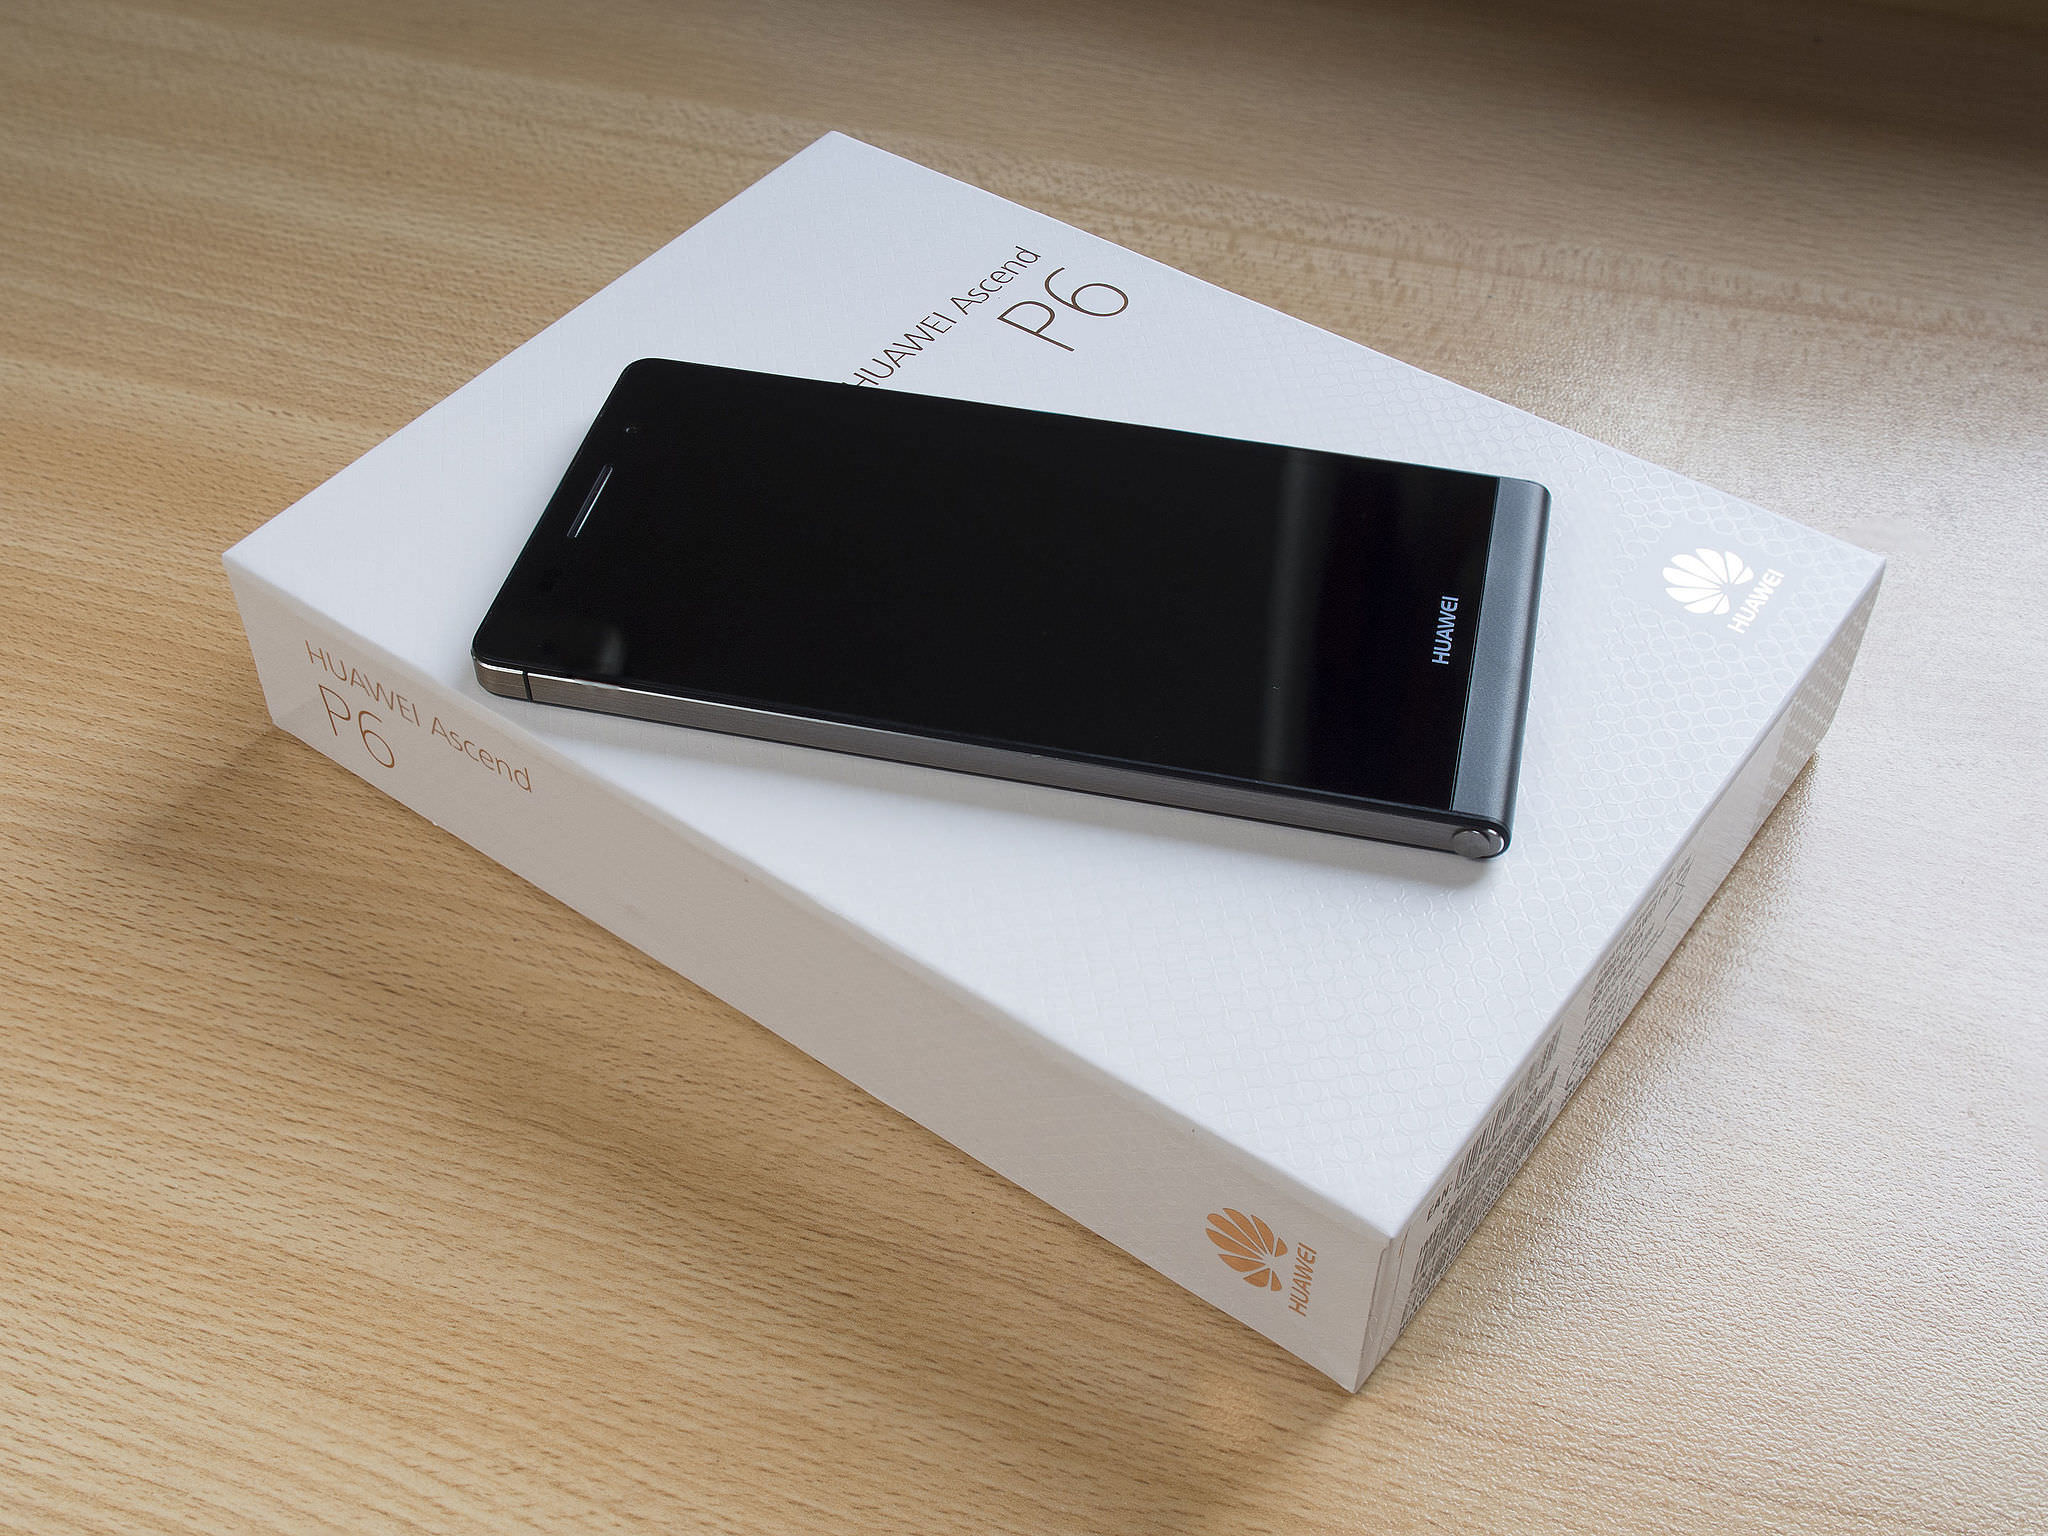 HUAWEI Ascend P6 image 